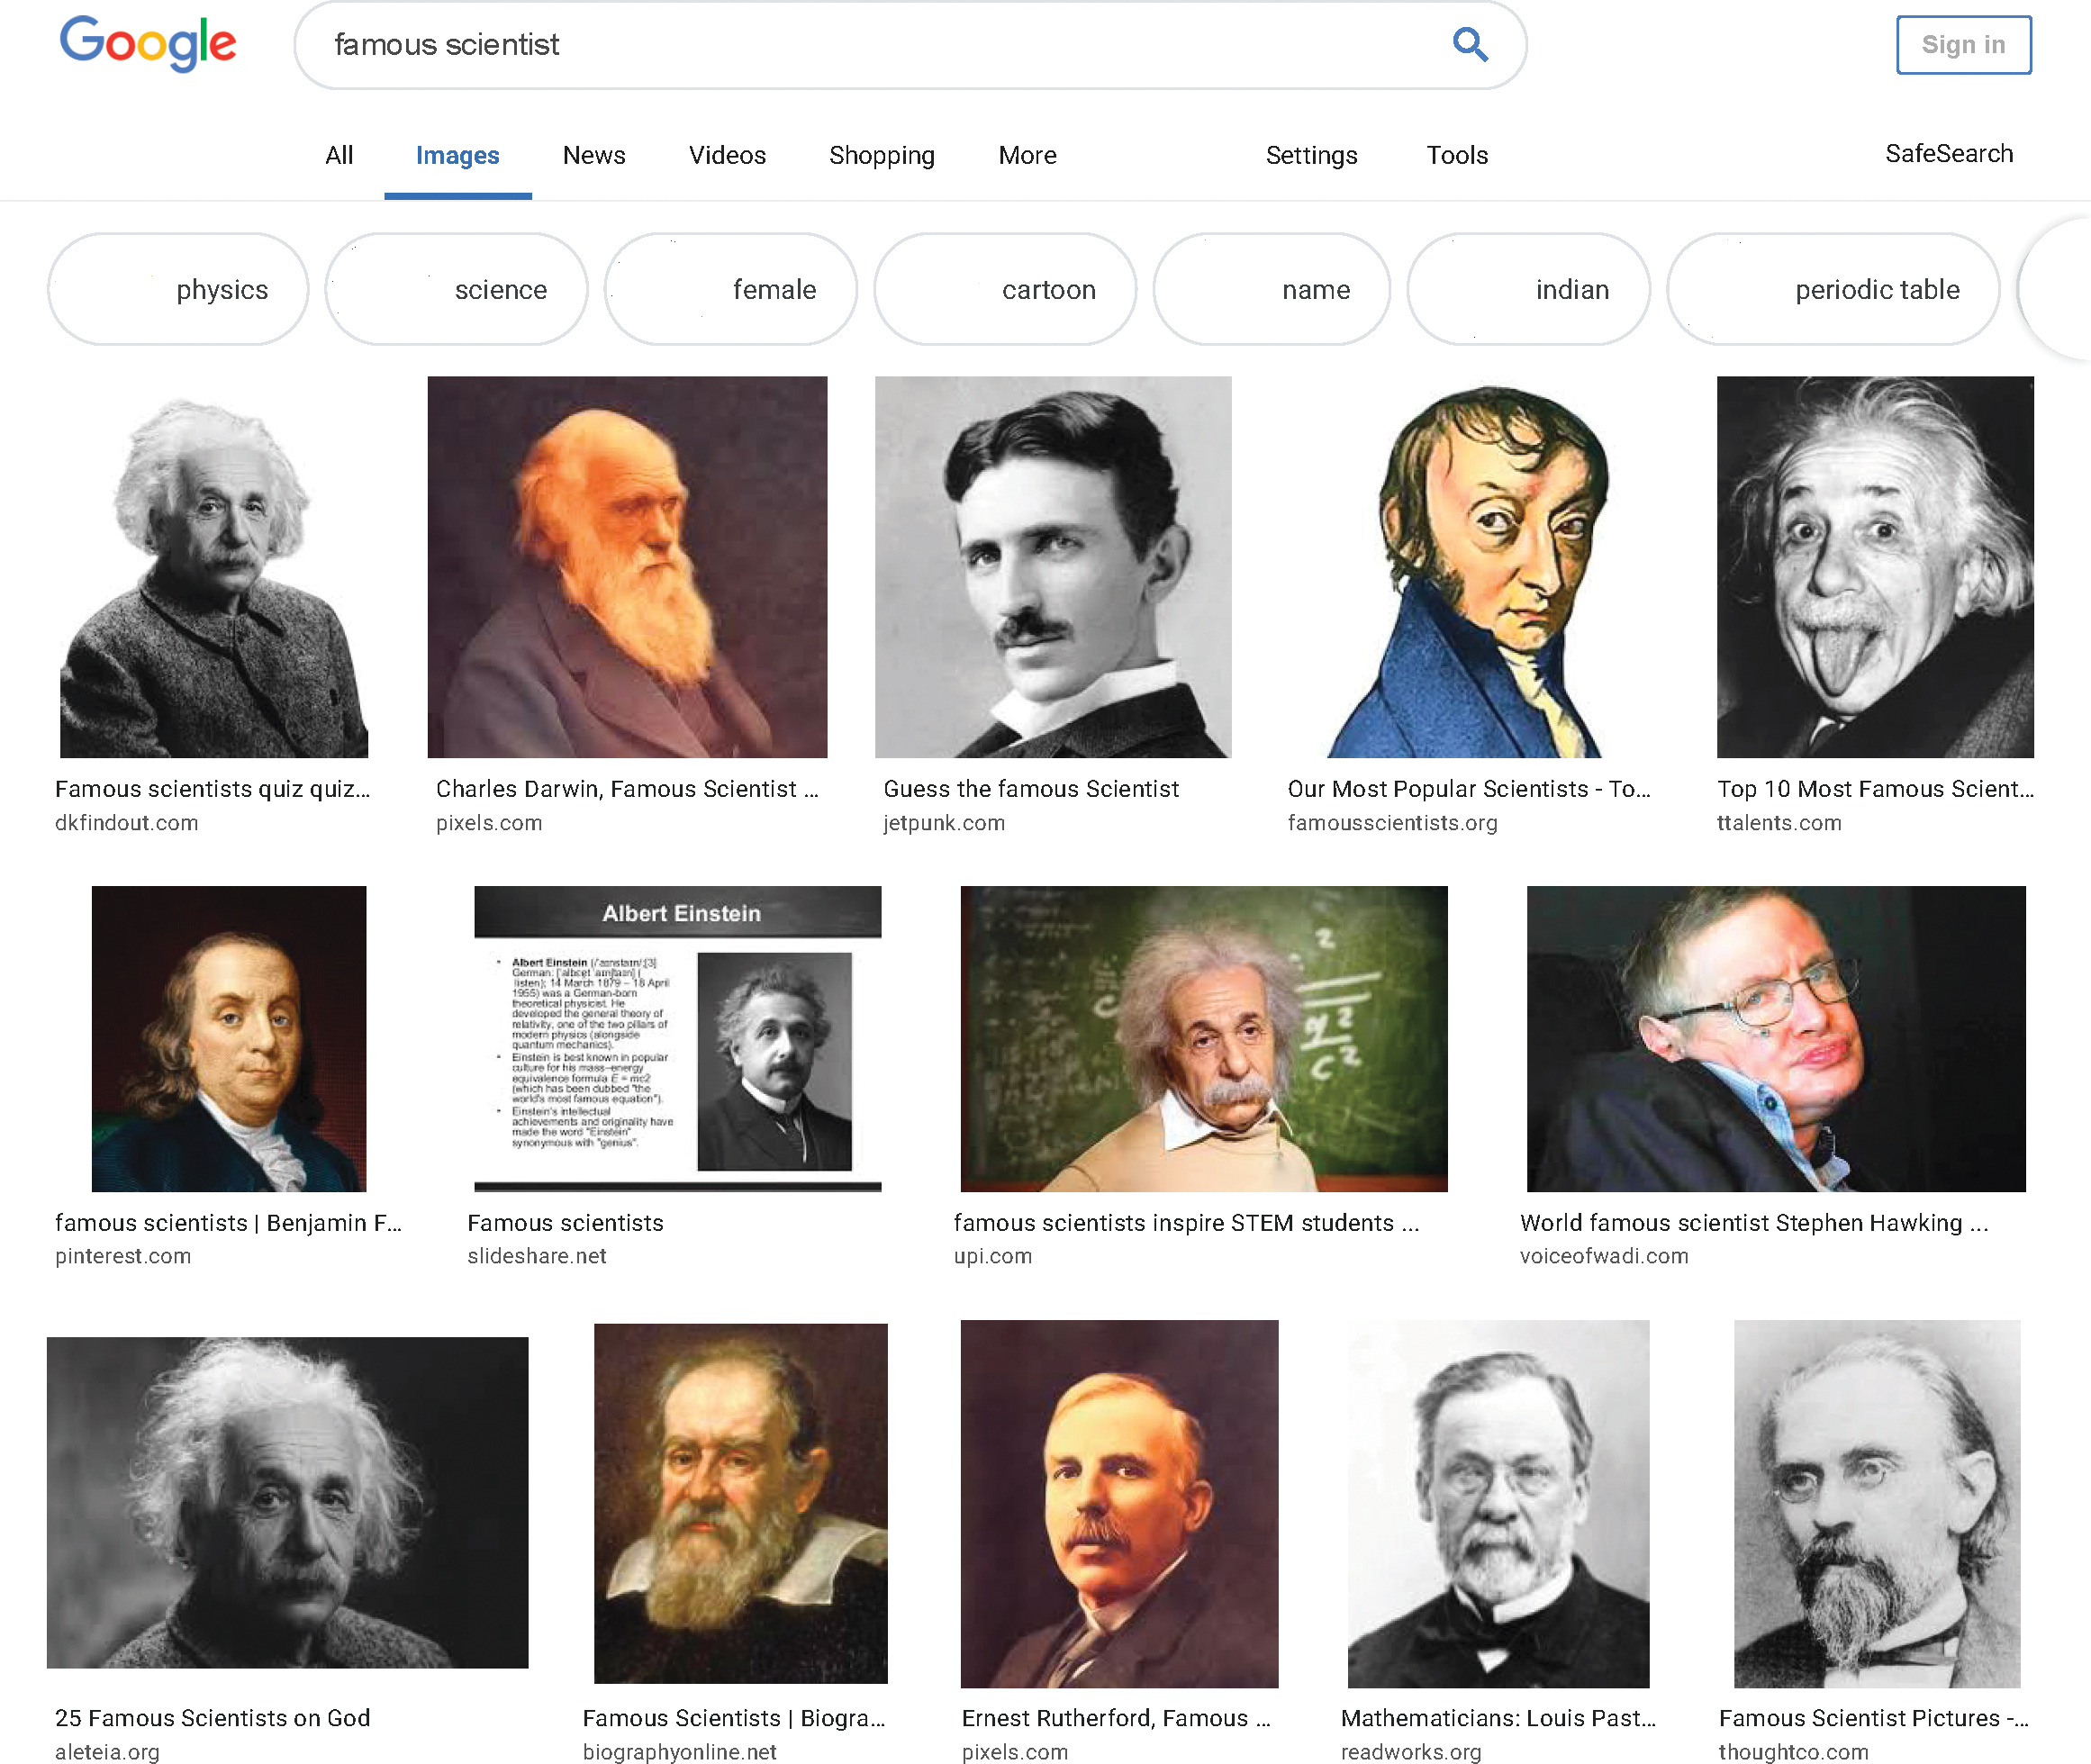 Google image search for “famous scientist” (screenshot from May 31, 2019)